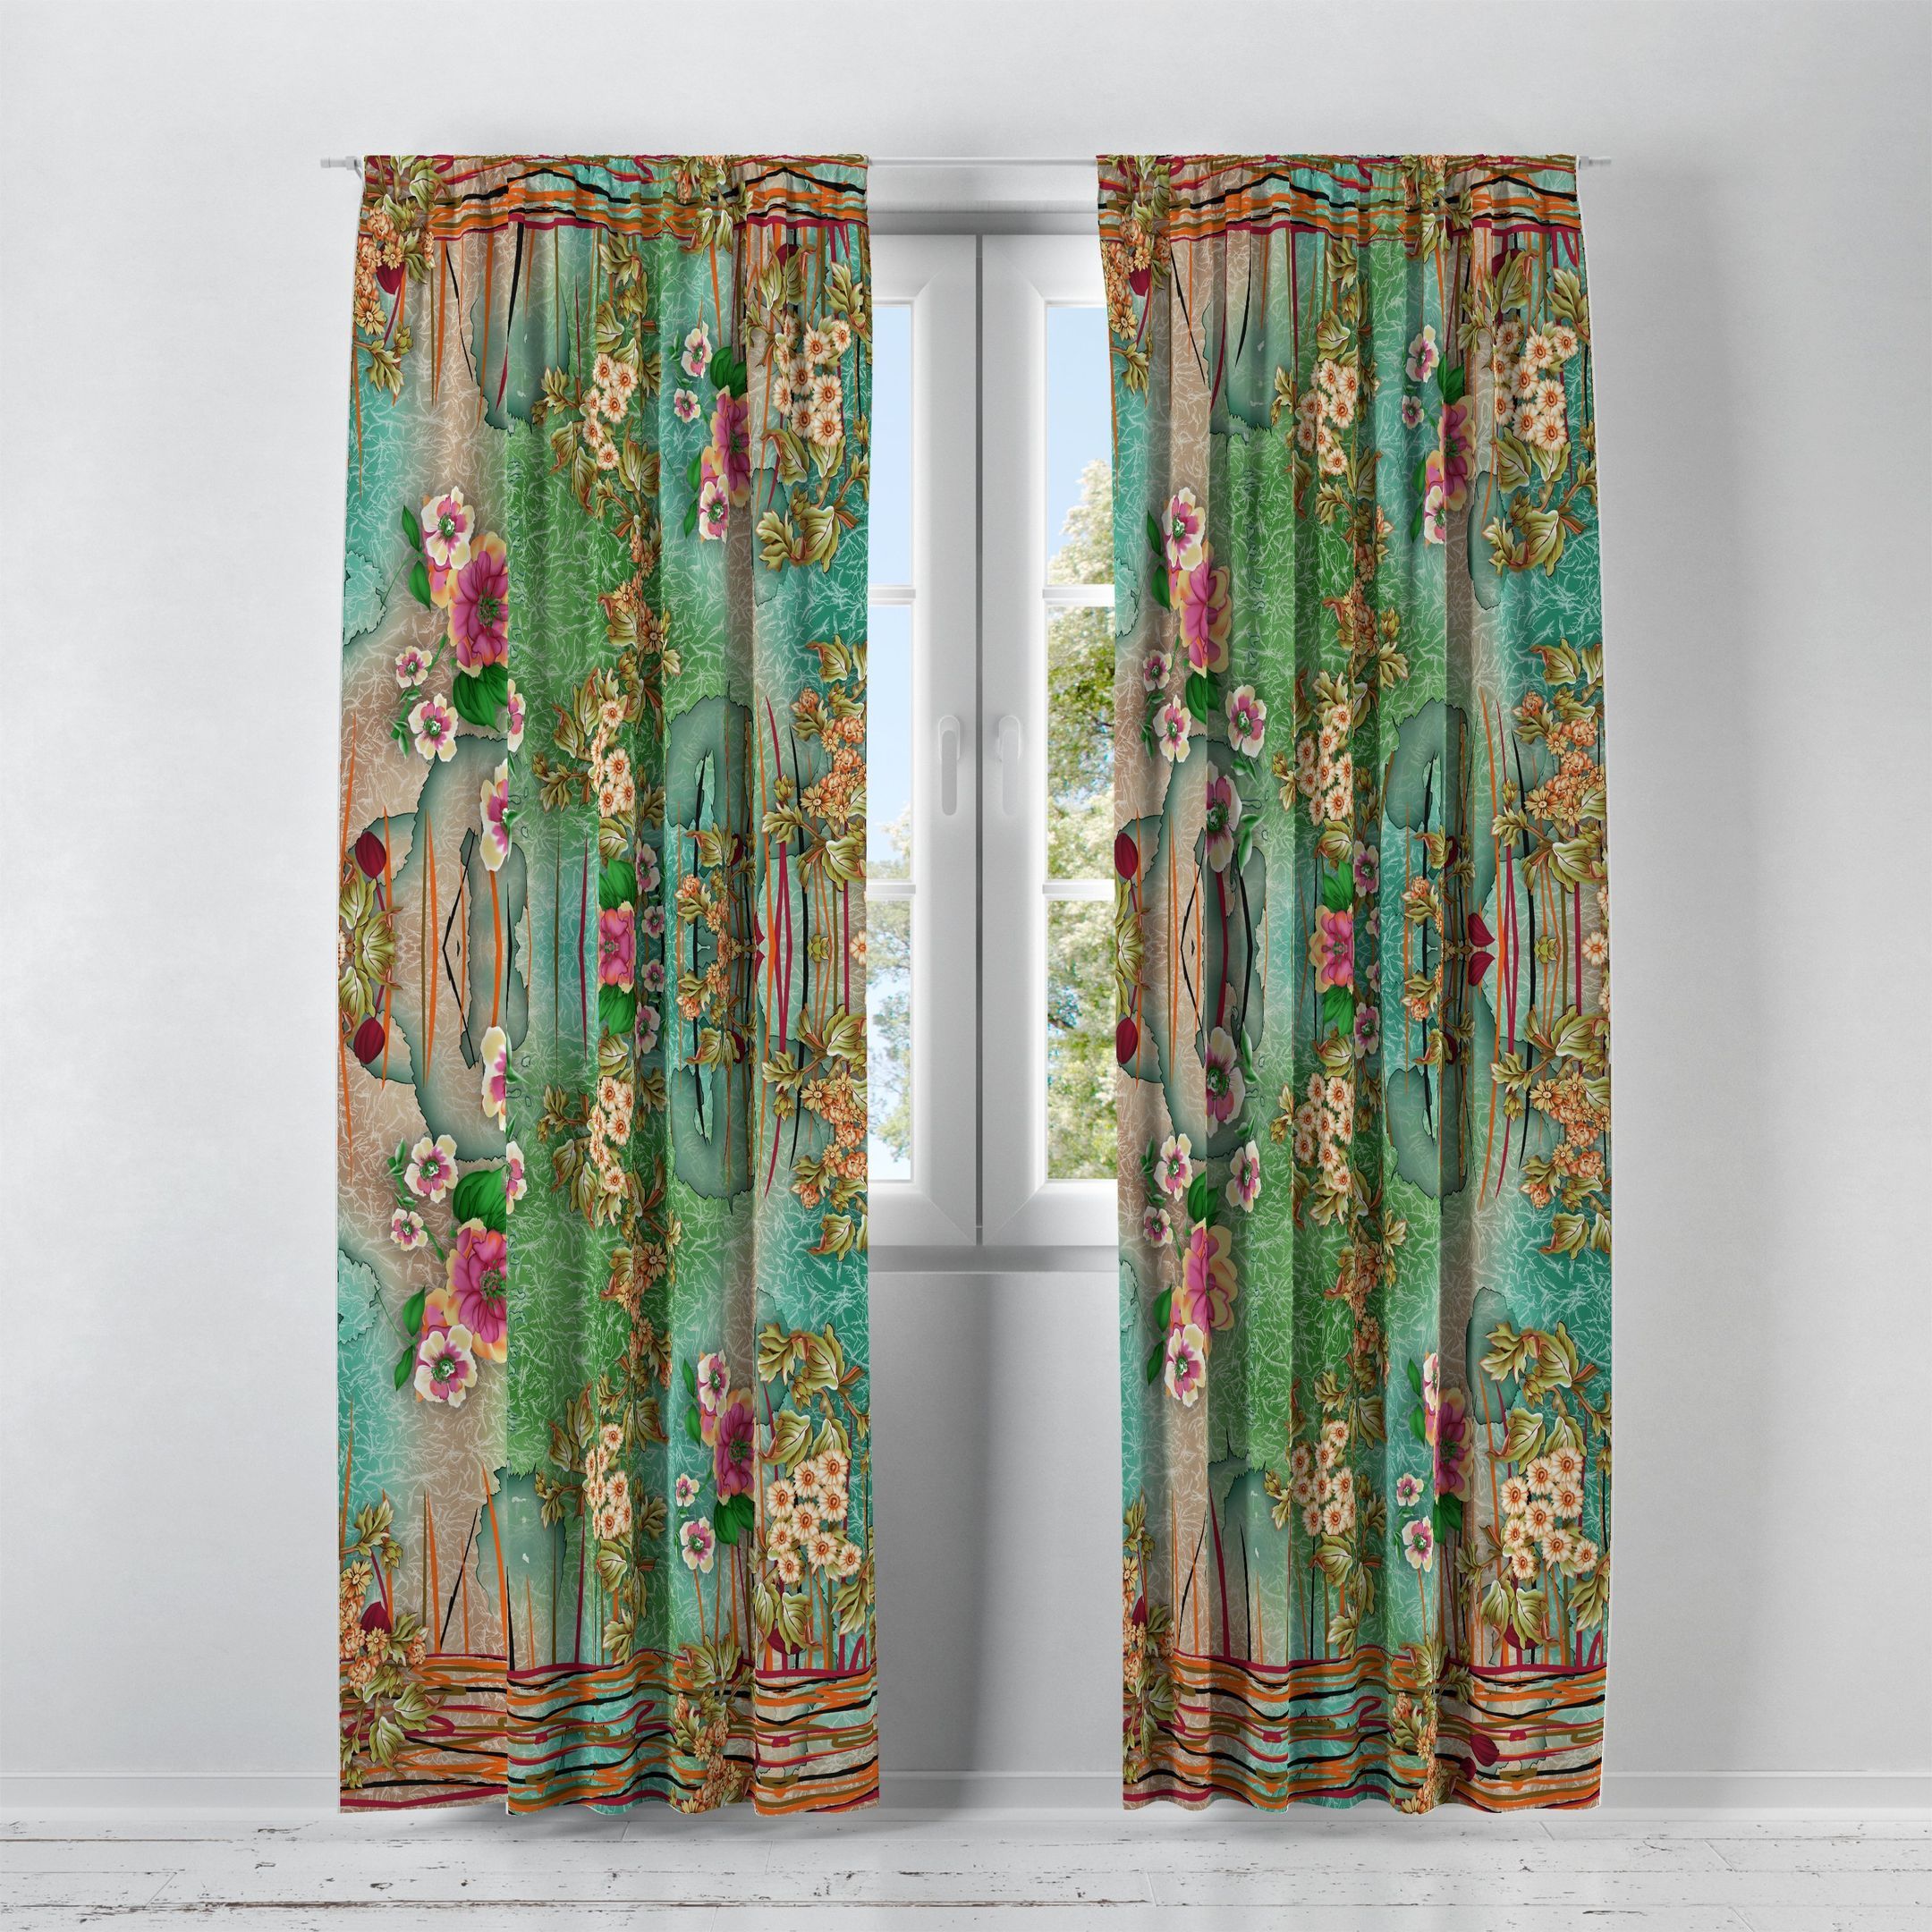 Attractive Boho Orient Printed Window Curtains Home Decor